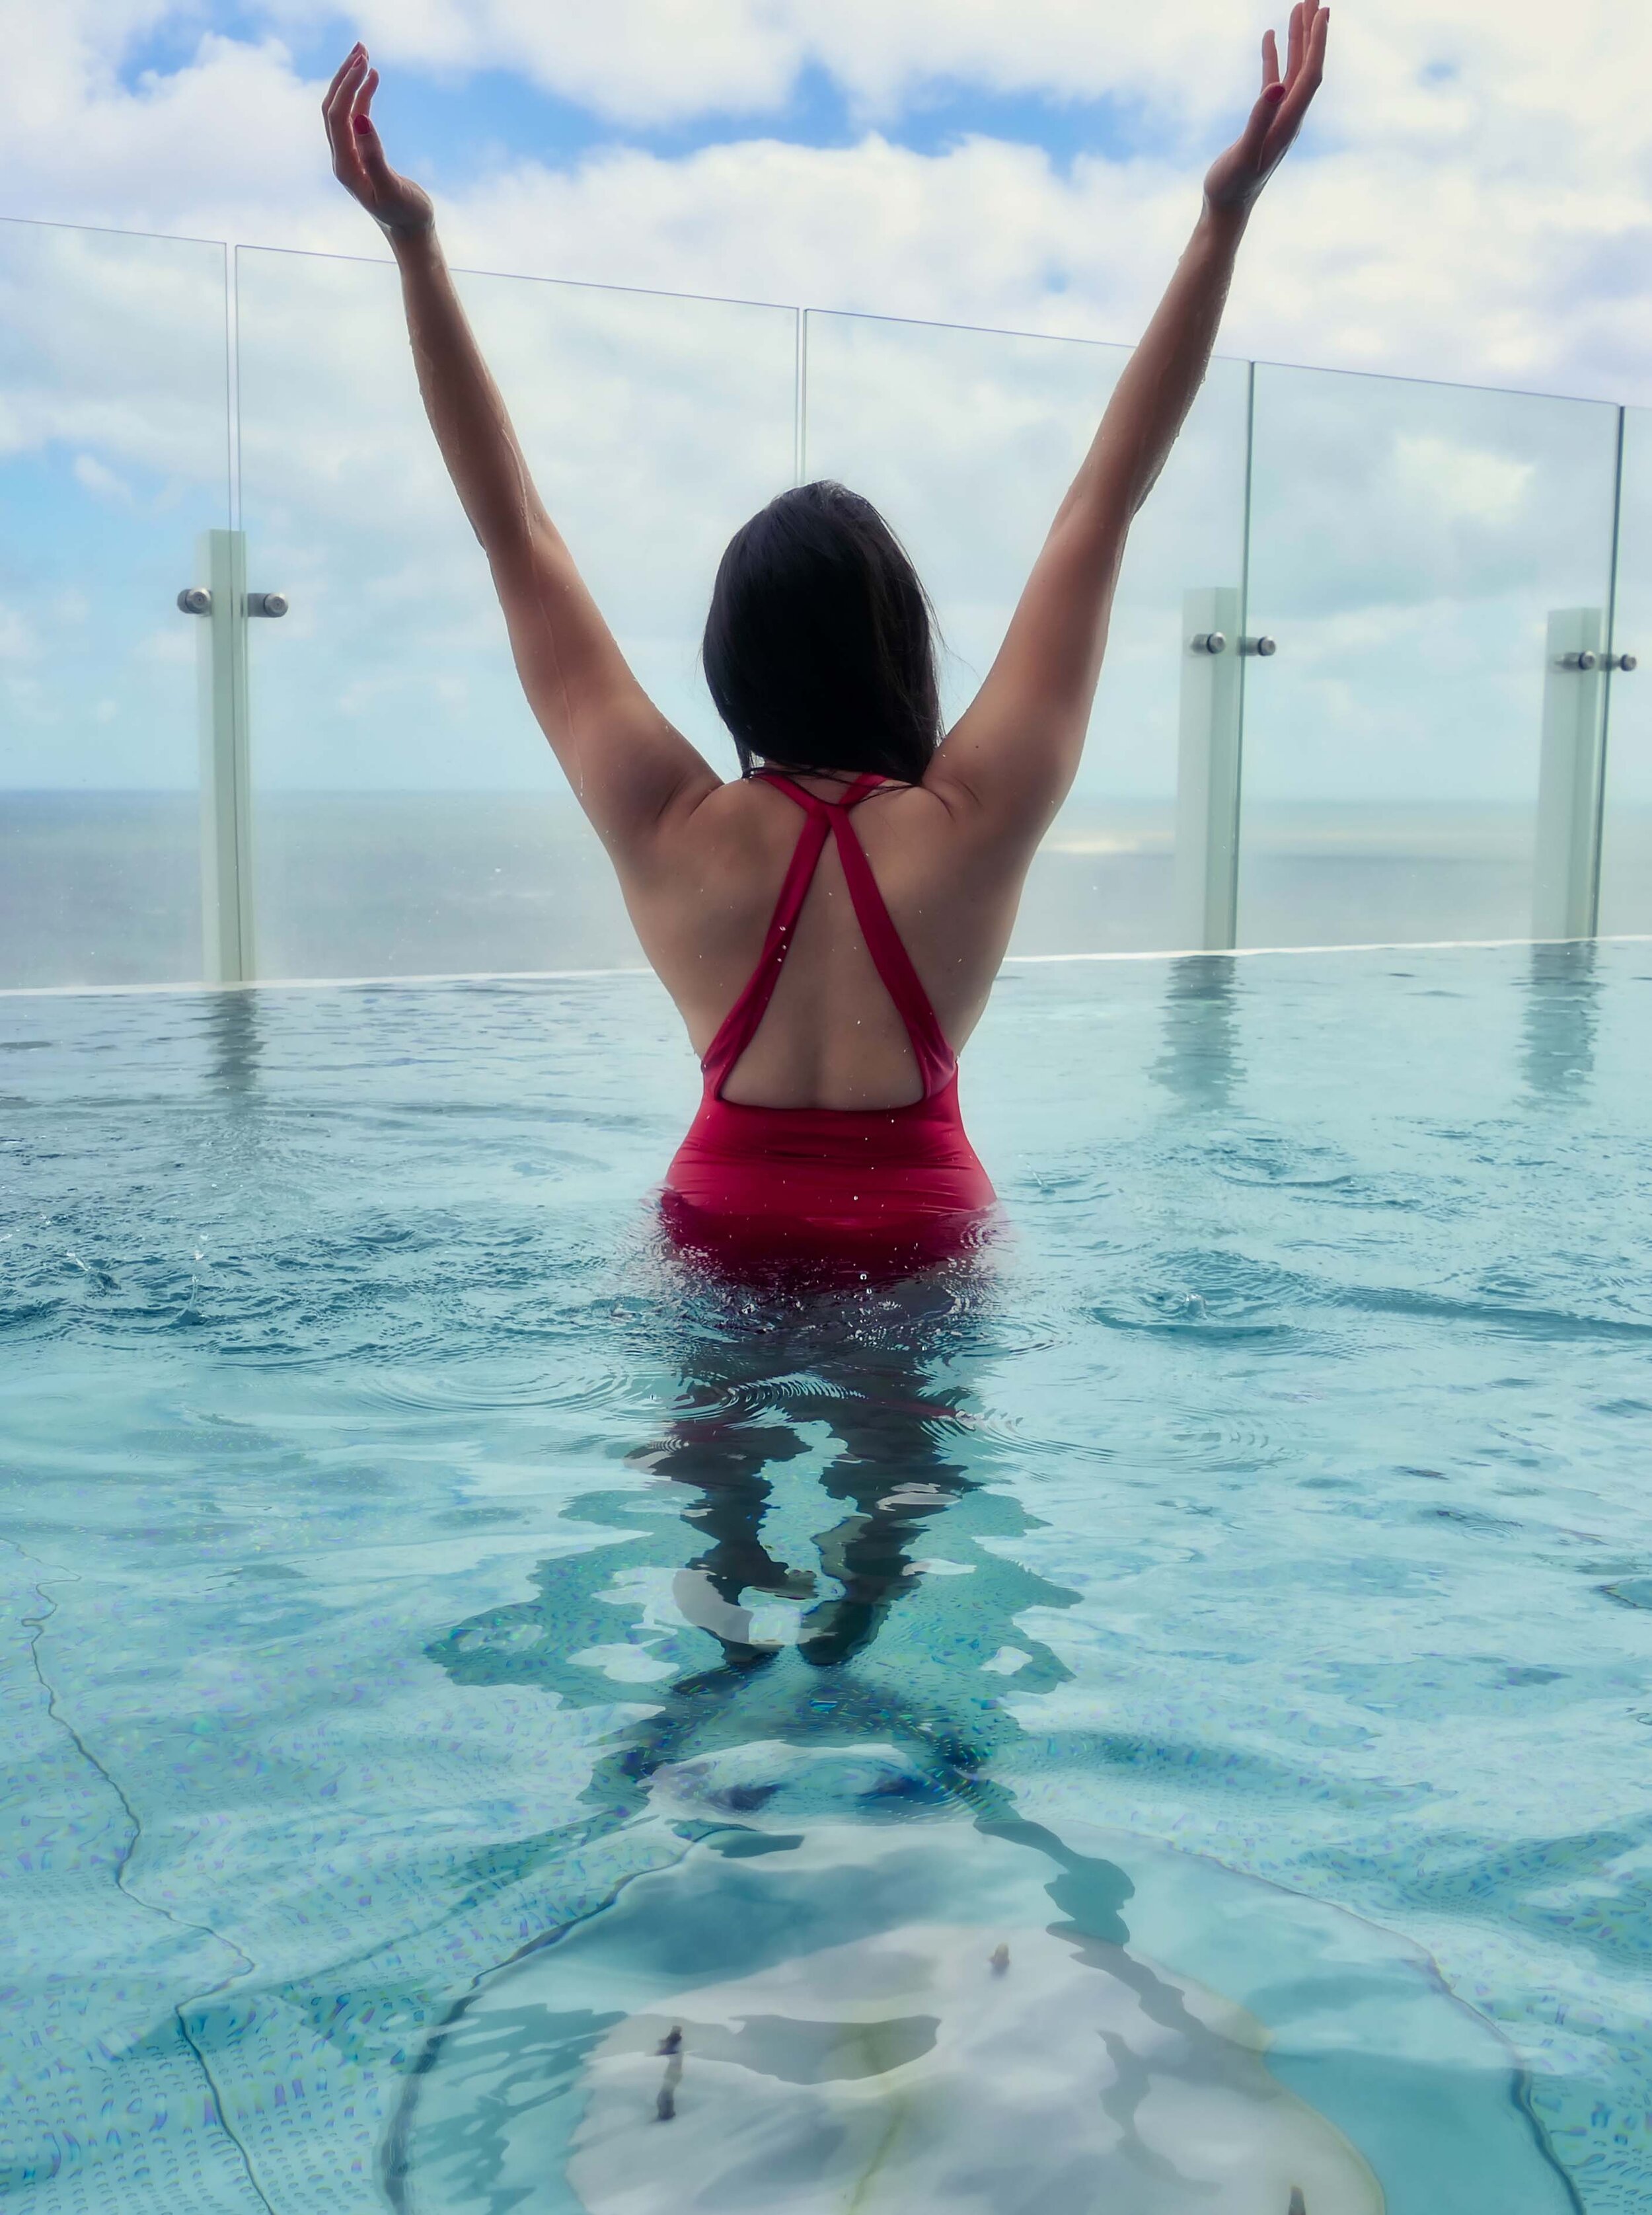 Here you see Escort Maya in an infinity pool with red swimming costume overlooking the sea.